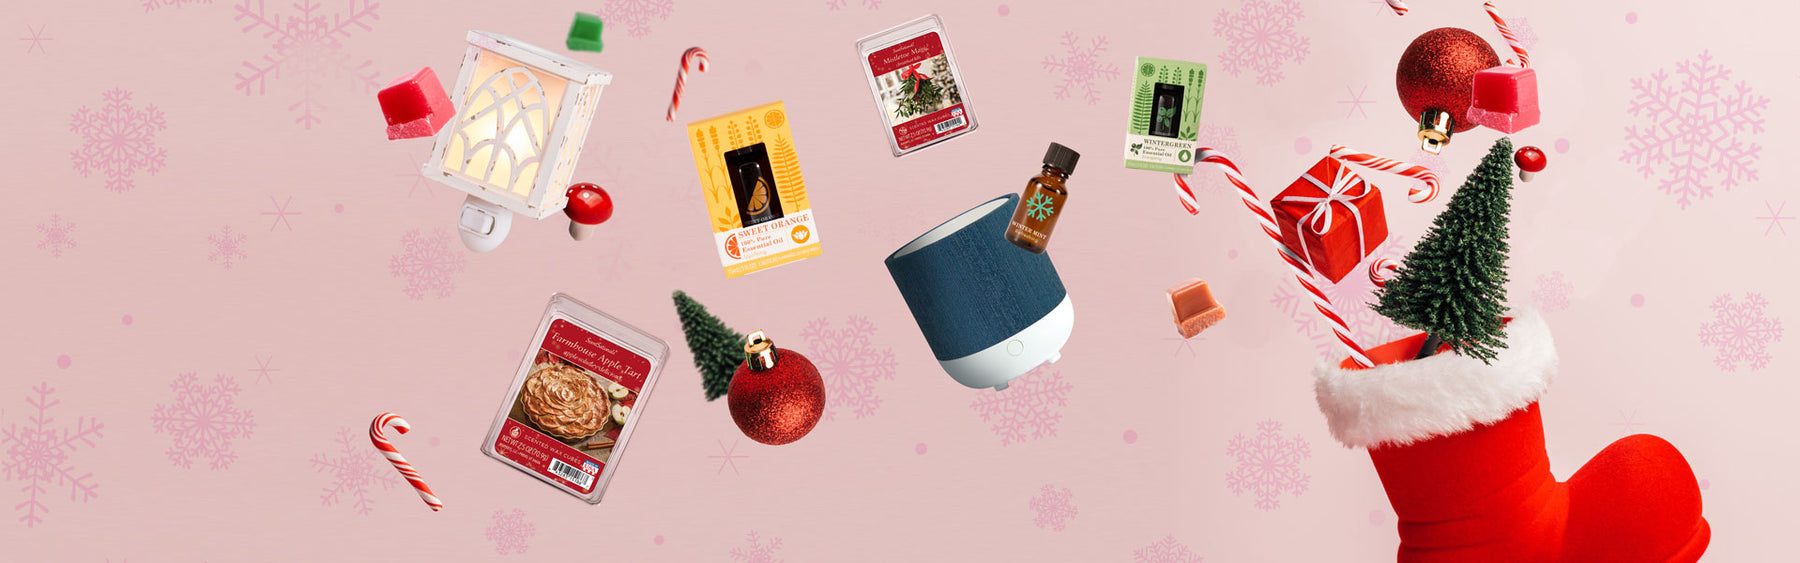 The Ultimate Holiday Gift Guide: Stocking Stuffers and More!